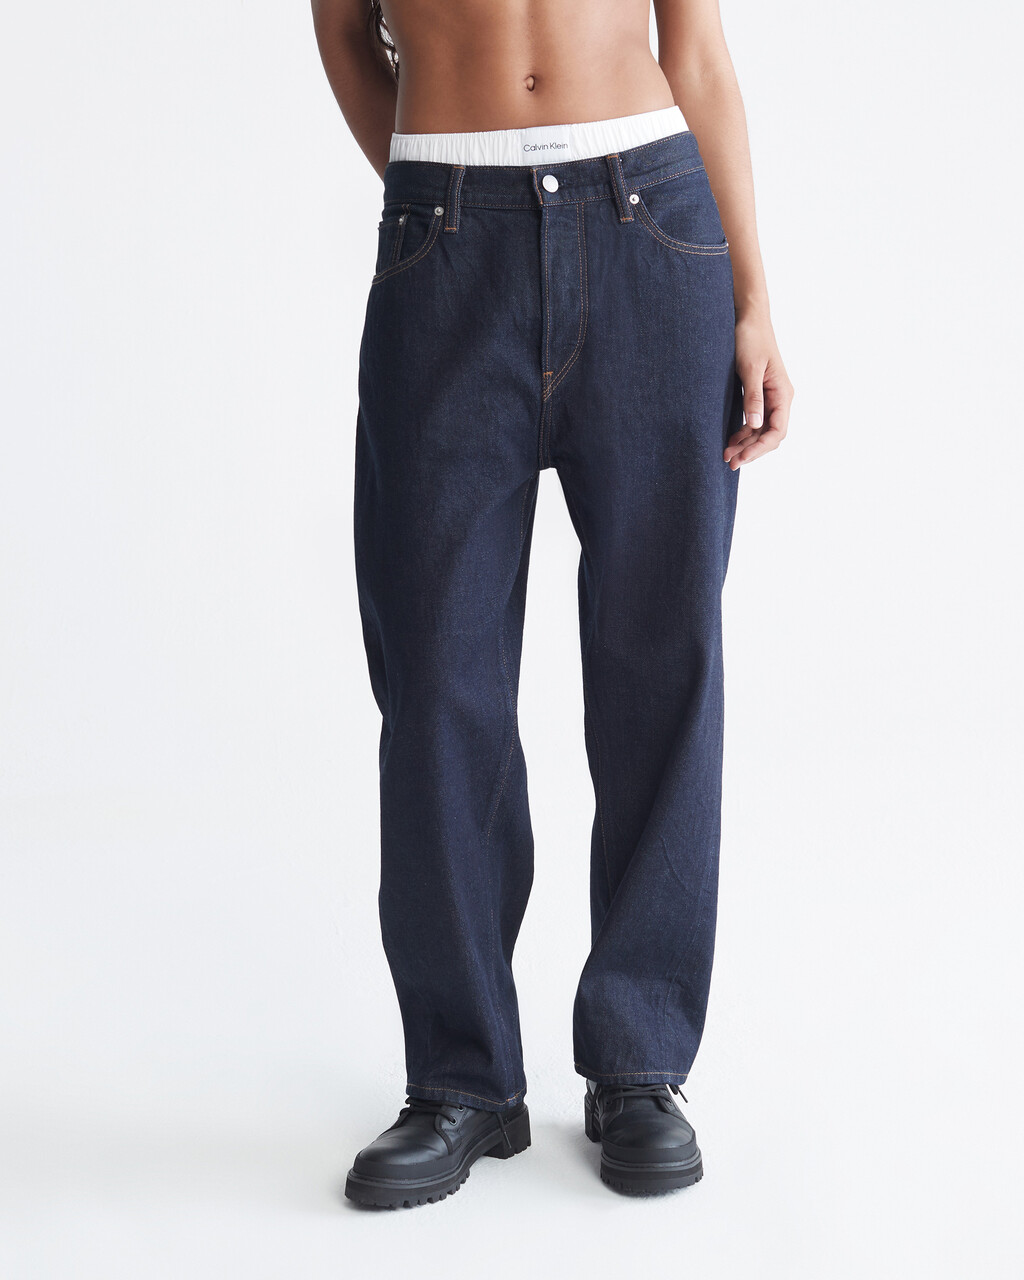 STANDARDS TWISTED SEAM RAW SELVEDGE JEANS, CK RAW SELVEDGE, hi-res